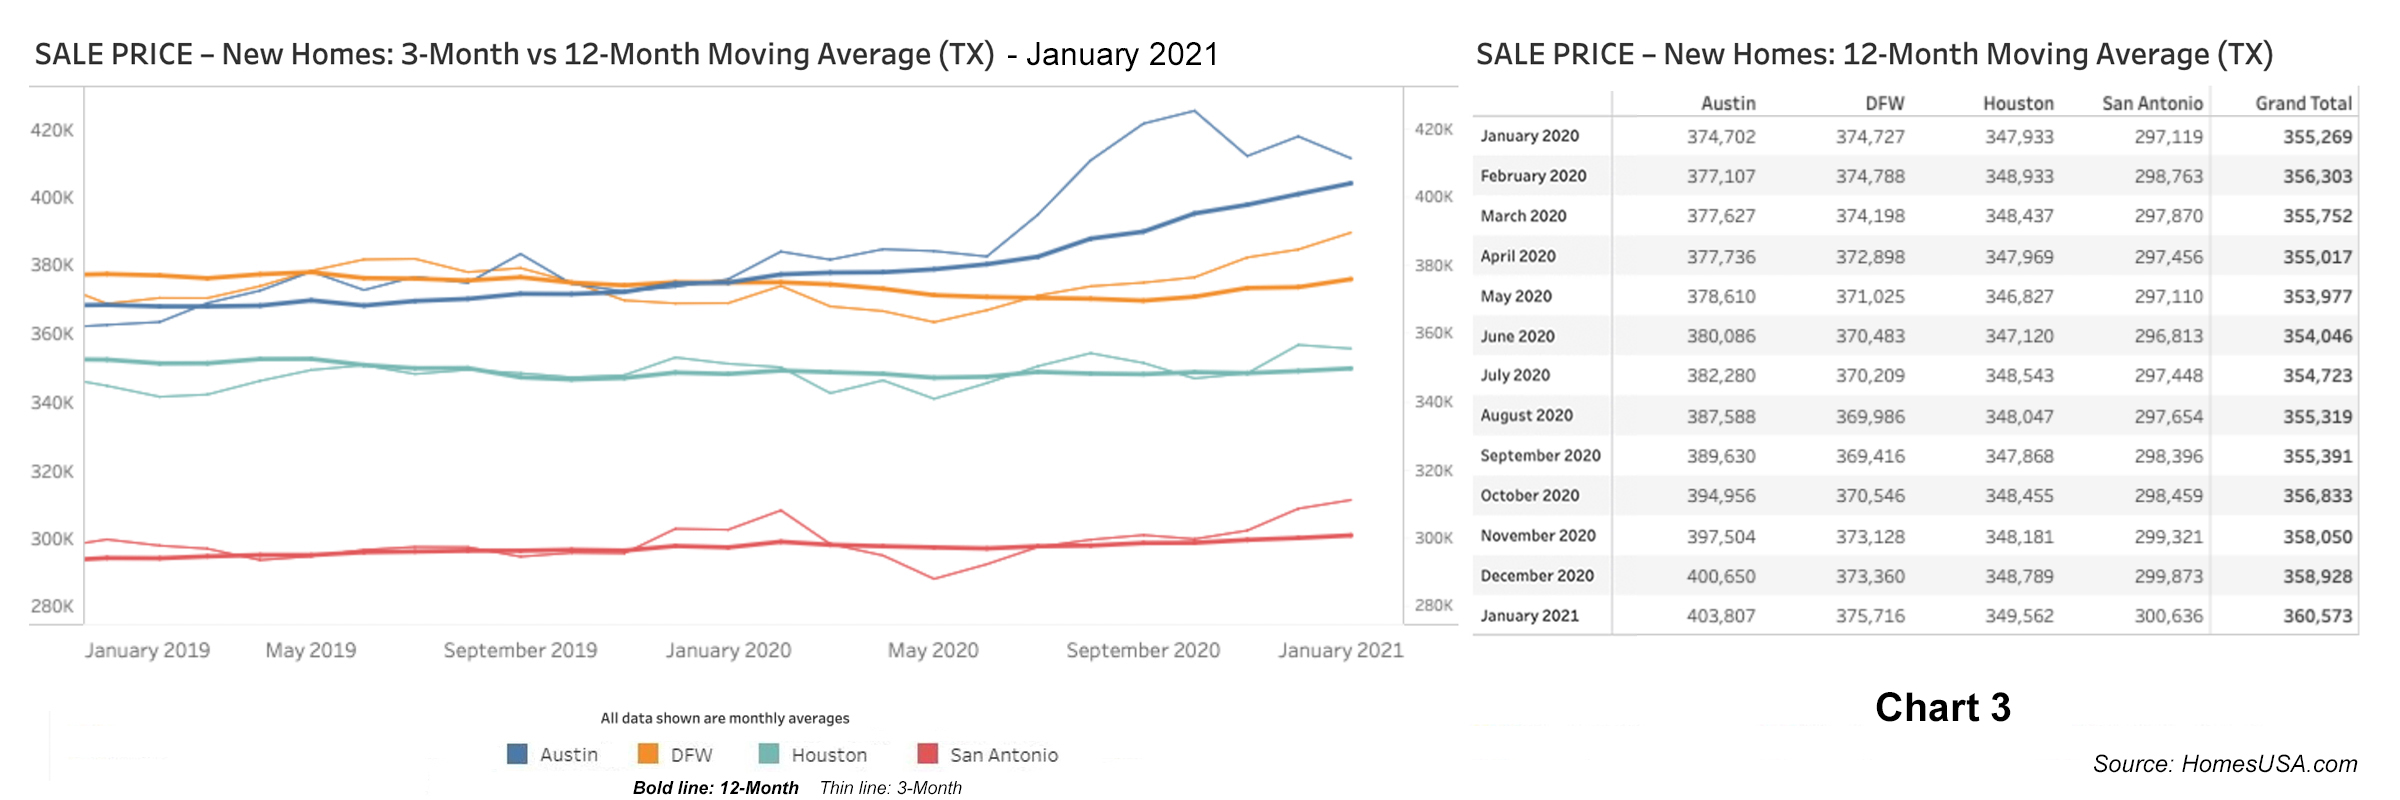 Chart 3: Texas New Home Prices - January 2021